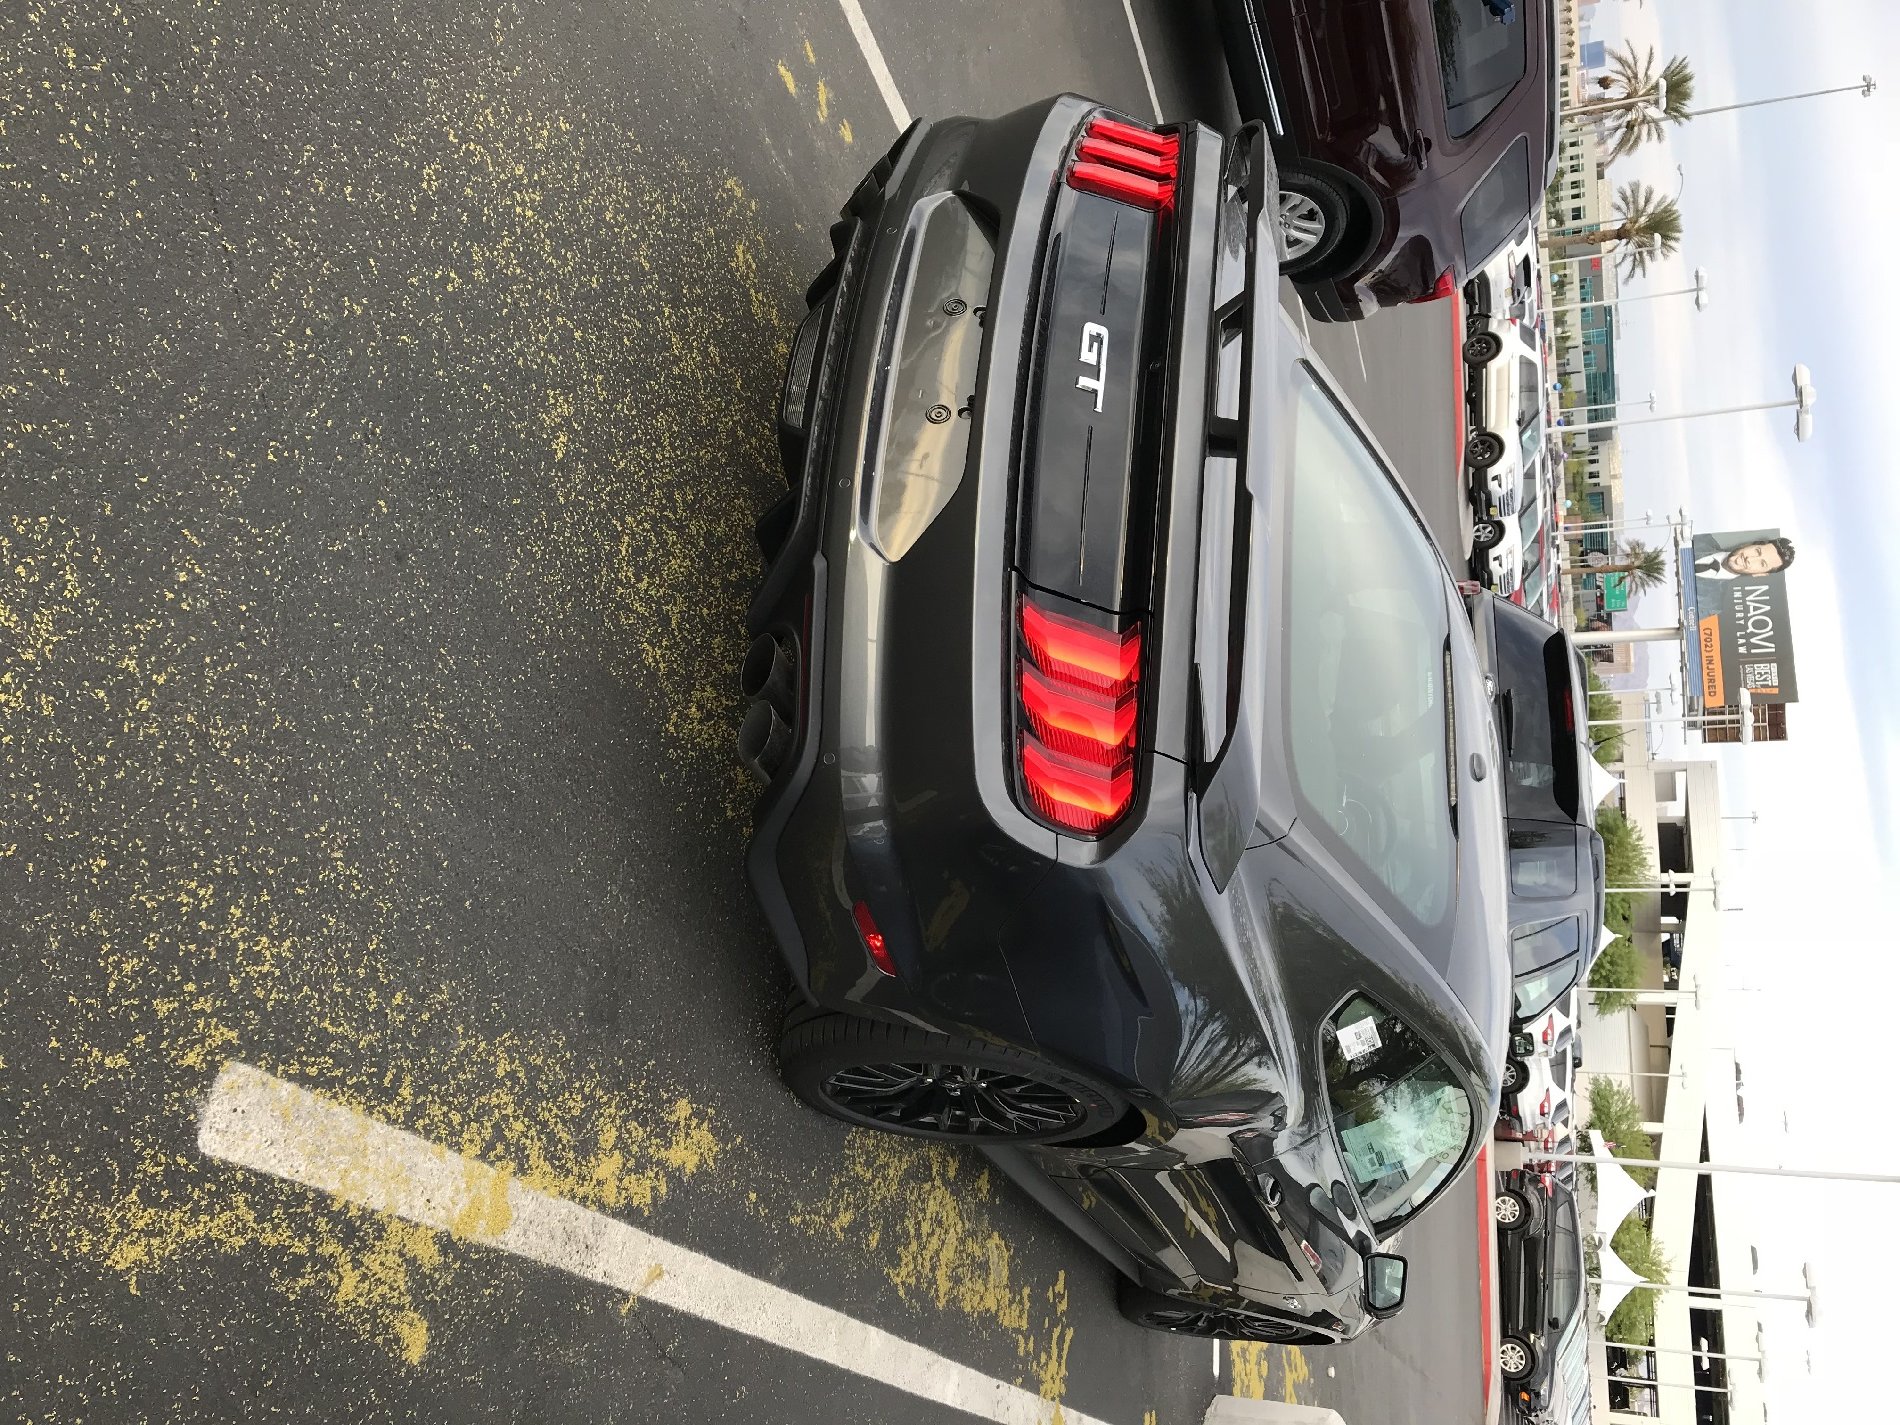 S650 Mustang Automatic COTUS Checker image2